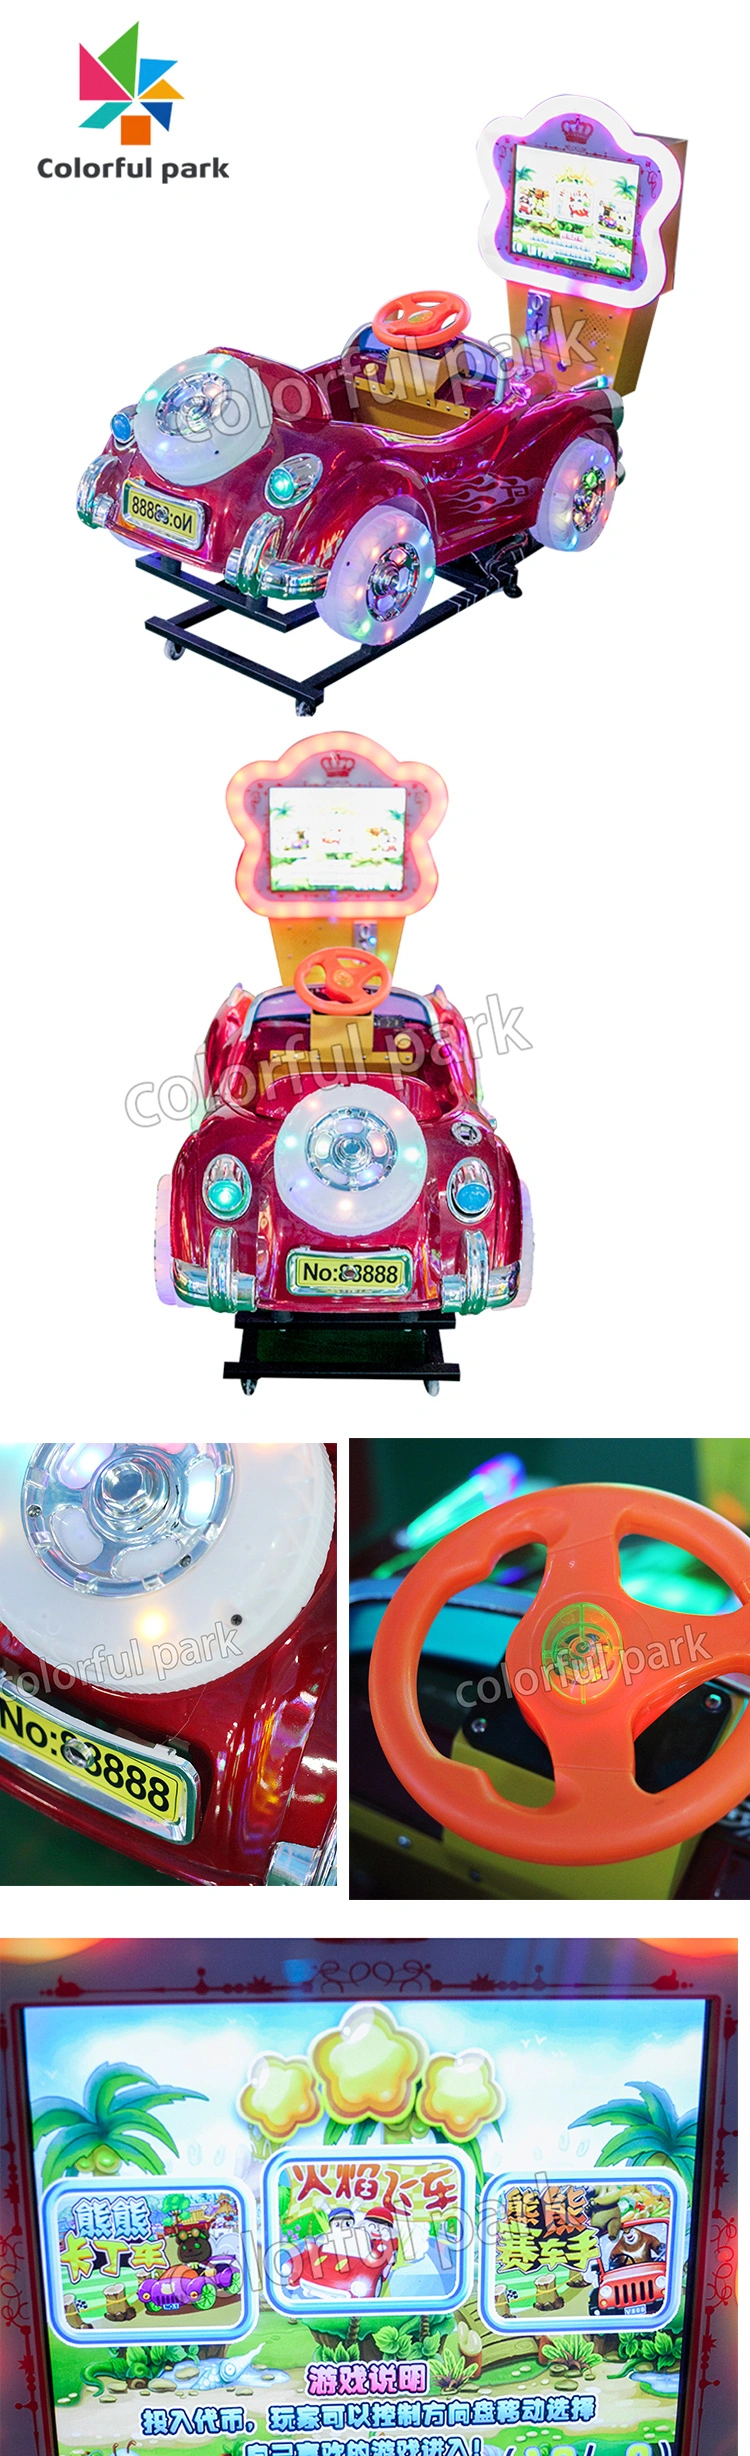 Colorful Park Happy Car Racing Video Game Coin Operated Machine Kids Arcade Game